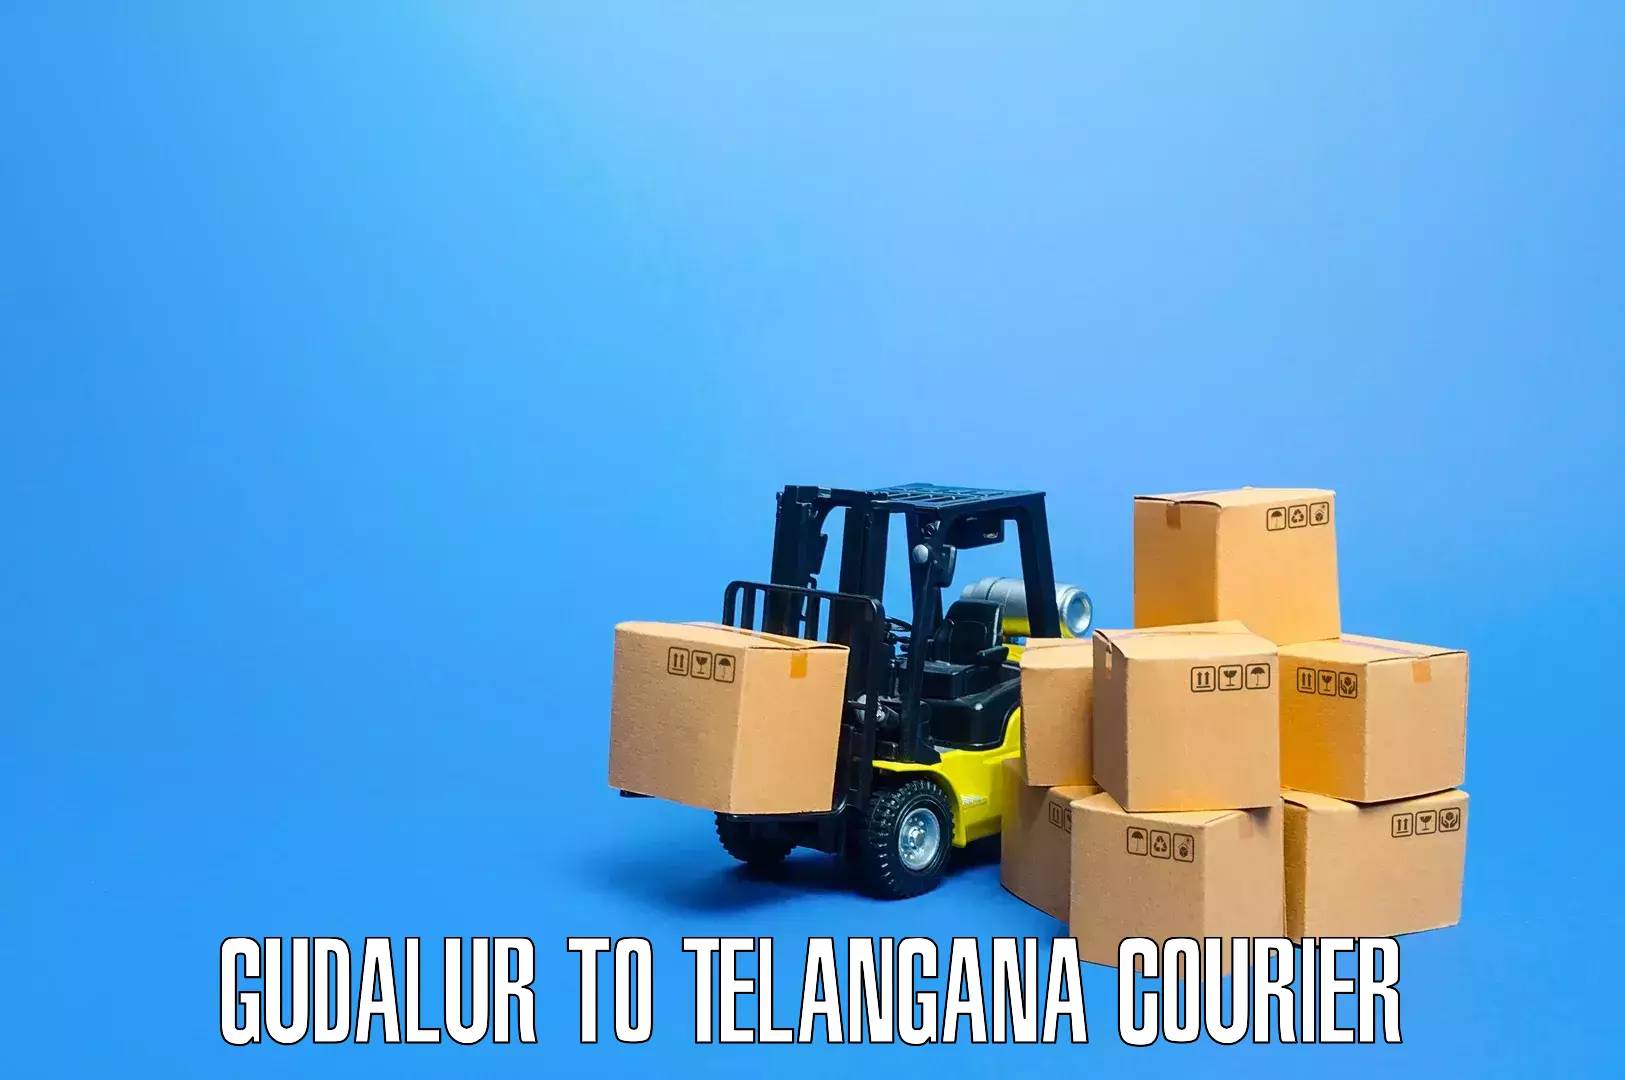 Furniture transport service Gudalur to Sultanabad